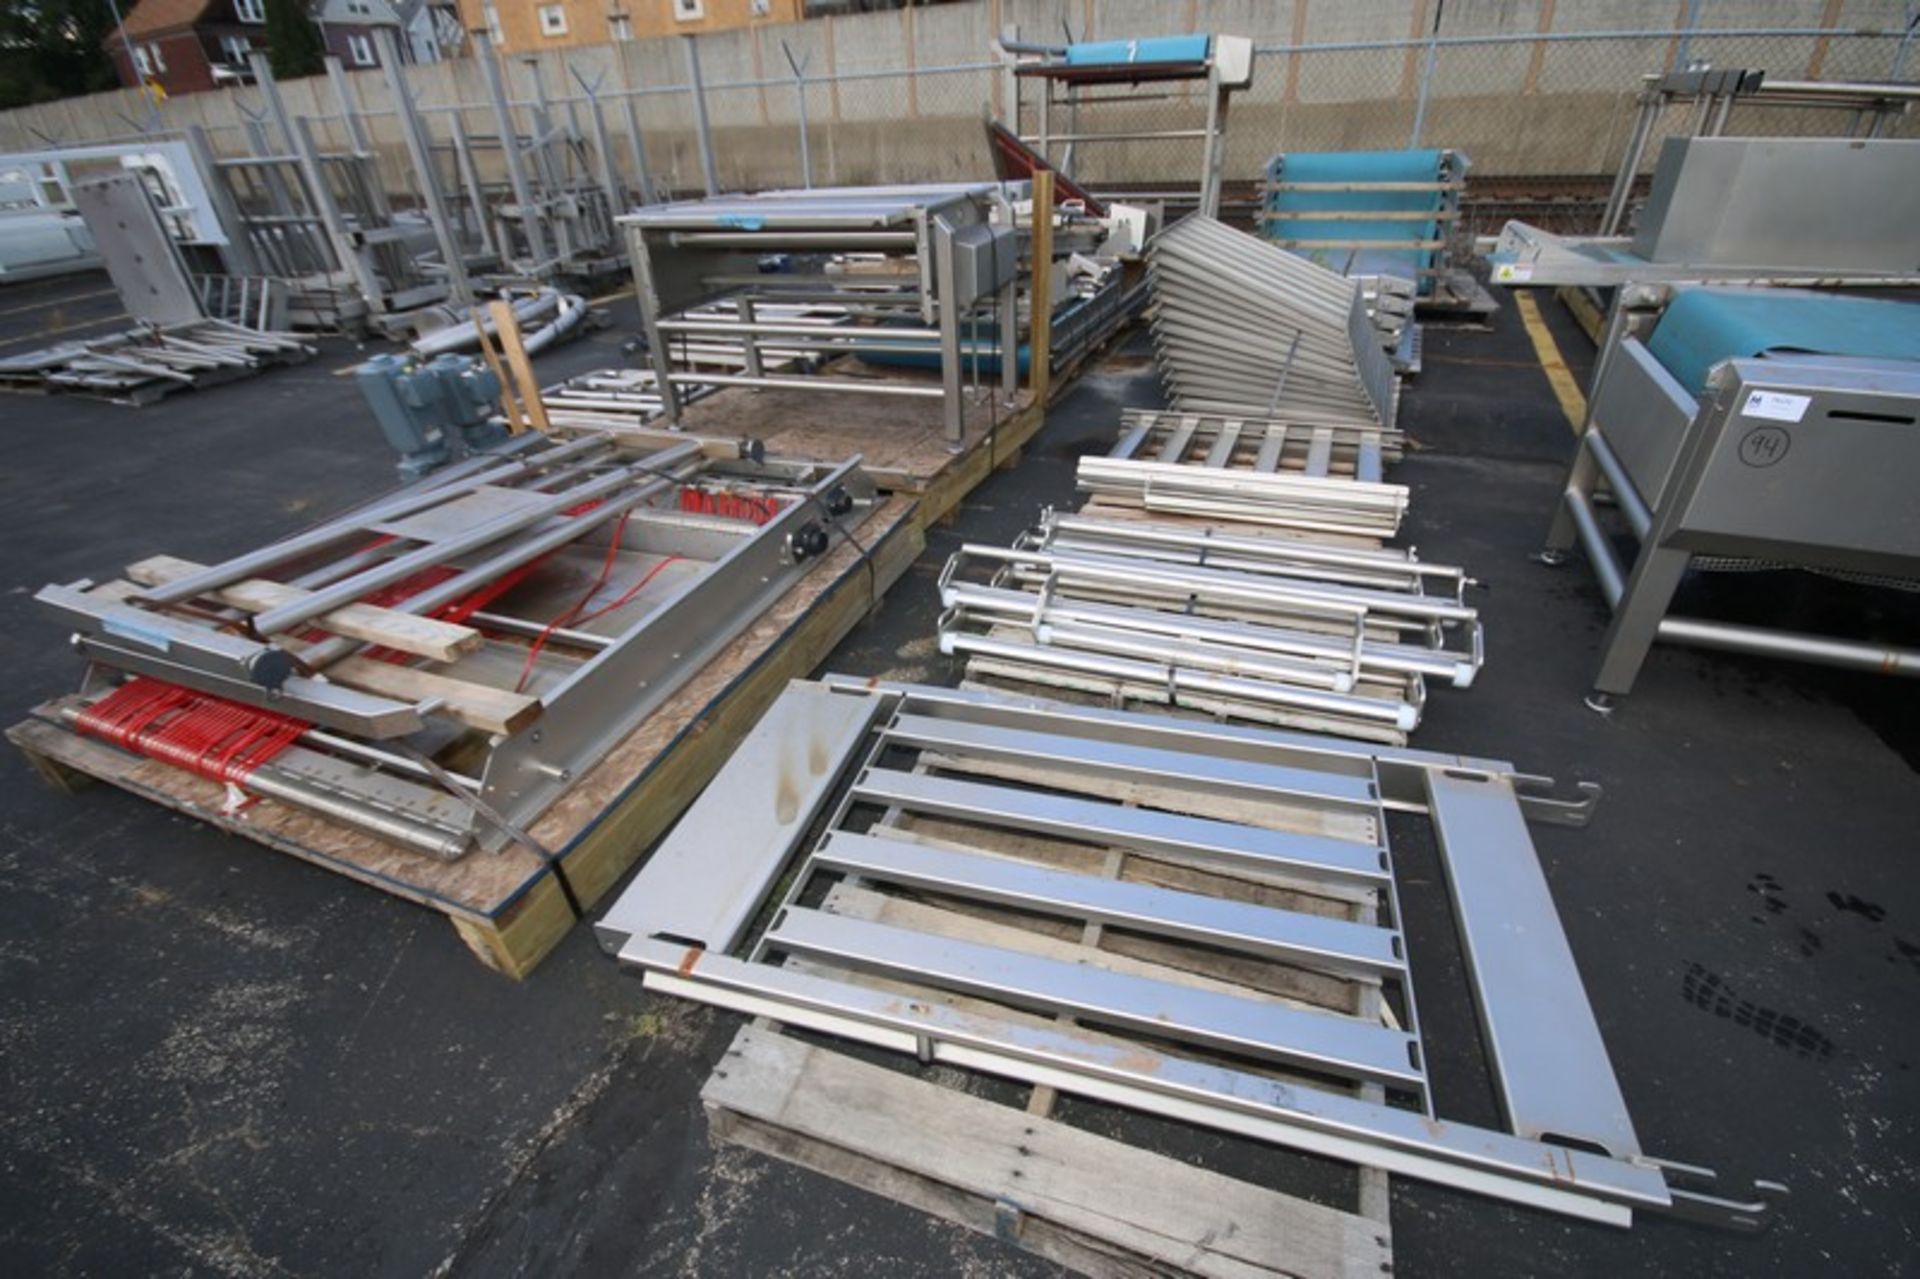 Large Lot of S/S Bakery Sheeting Conveyor System, Aprox. 250' Total Sections, 27" & 43" Wide Belt - Image 5 of 6